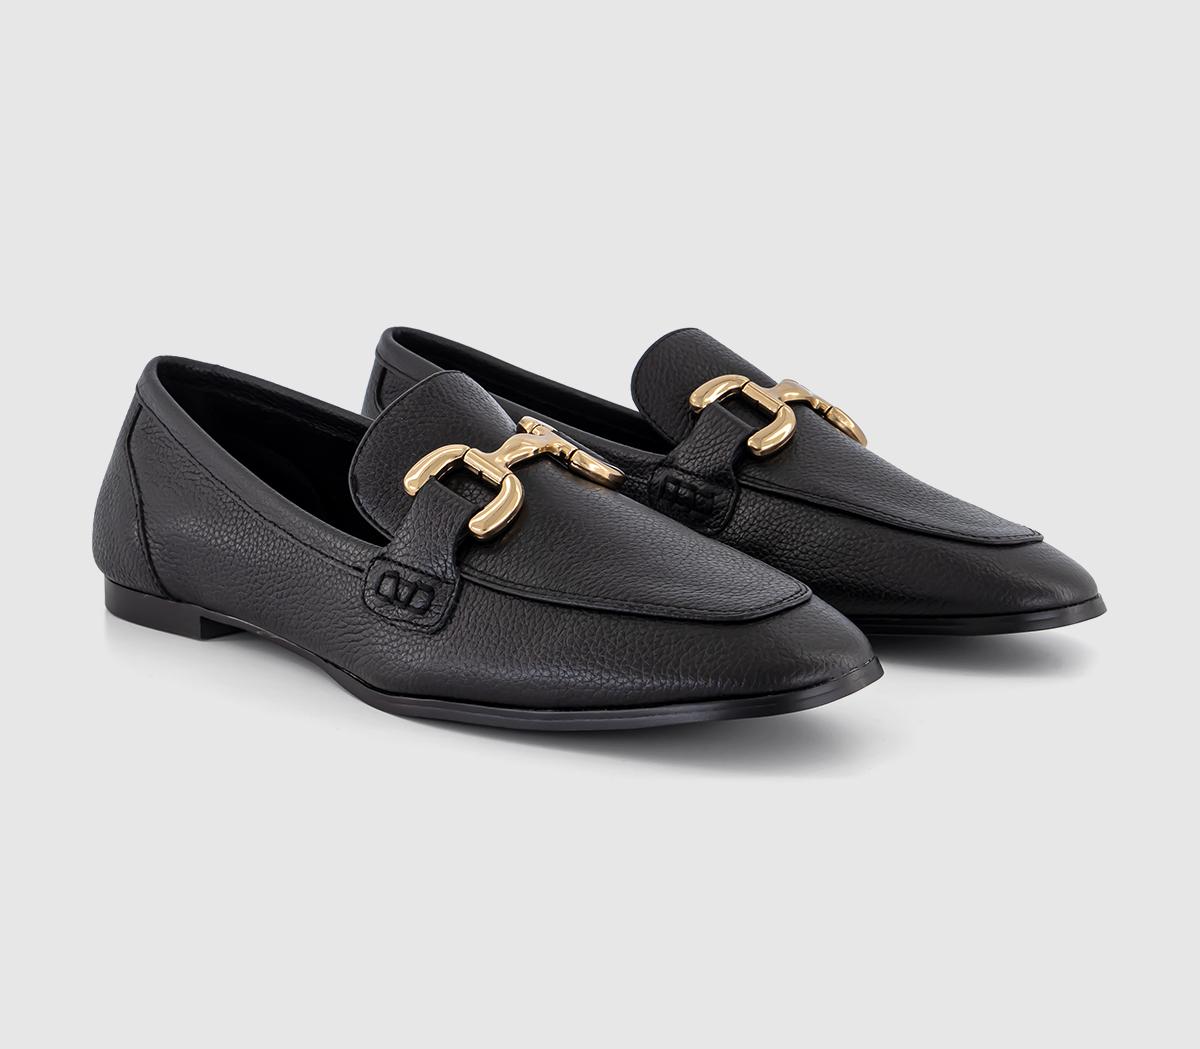 OFFICE Womens Farland Leather Trim Loafers Black, 6